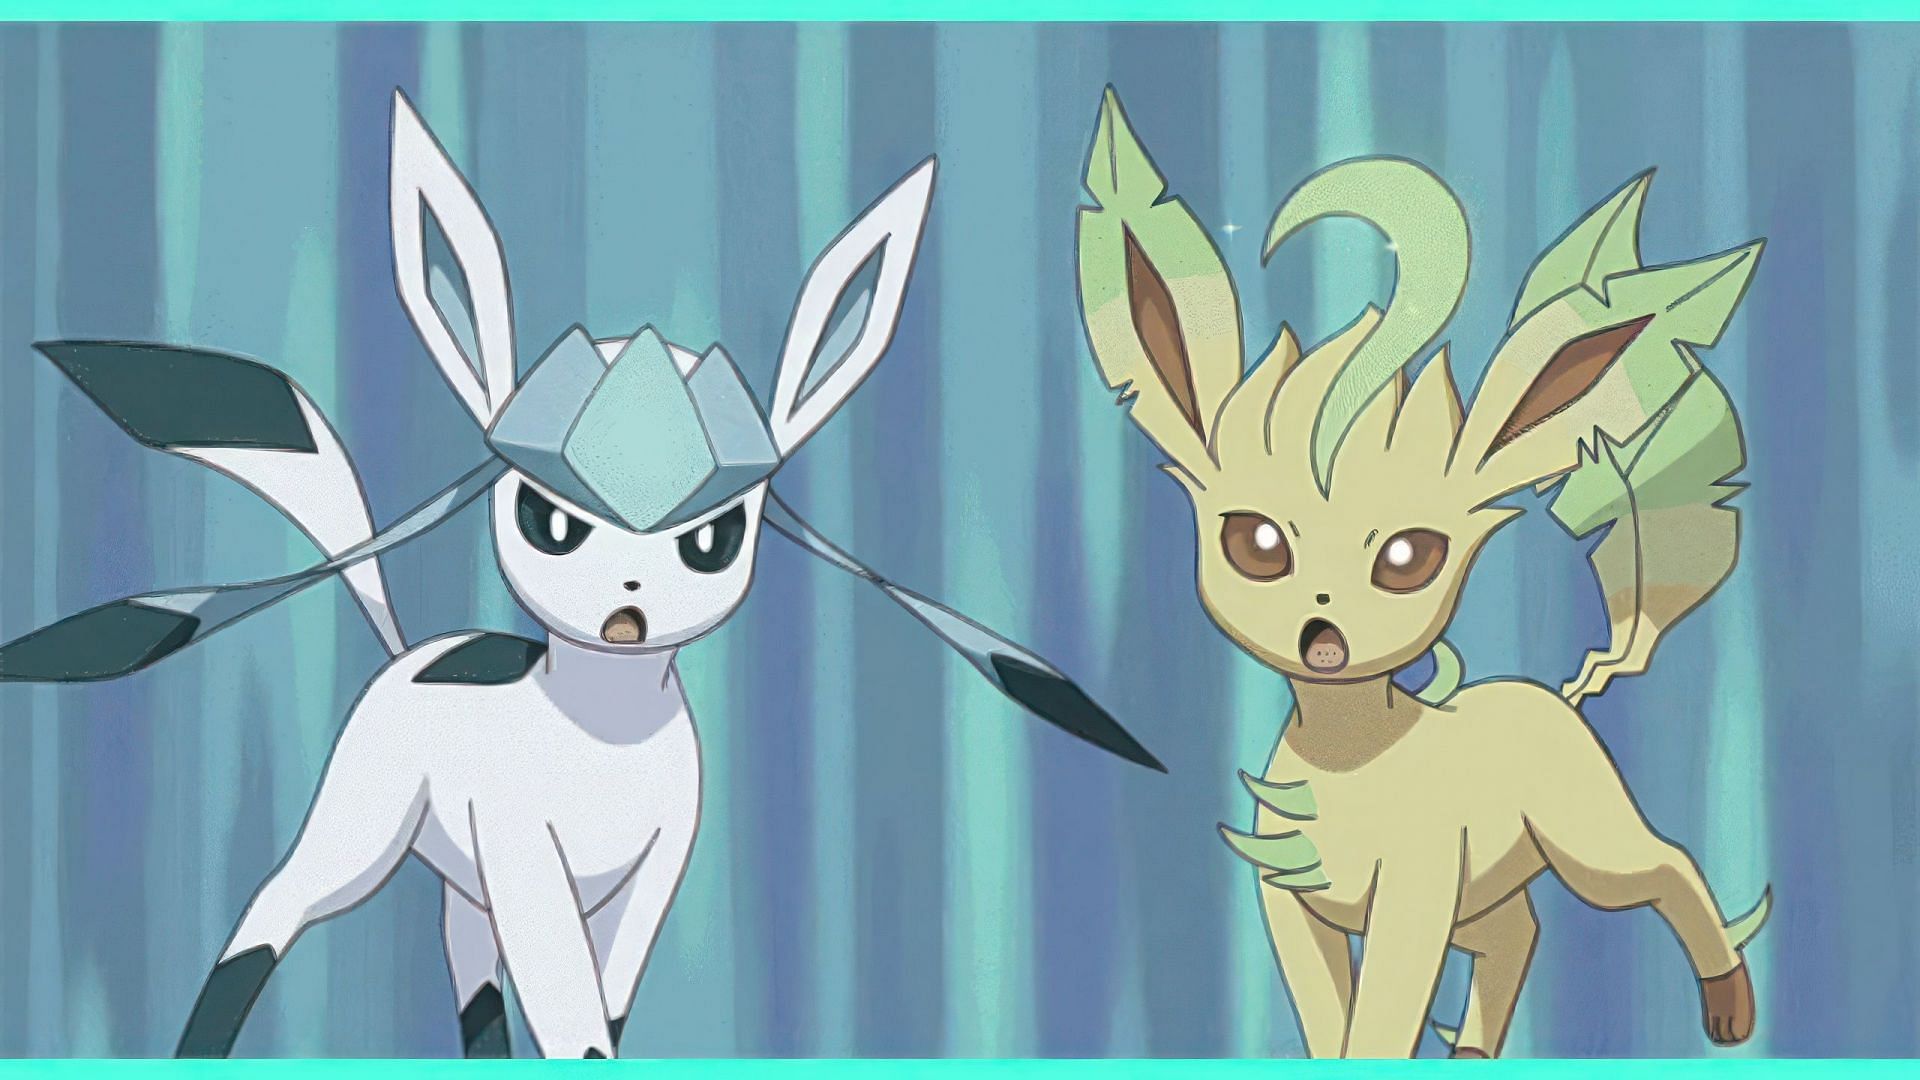 Glaceon and Leafeon (Image via TPC)